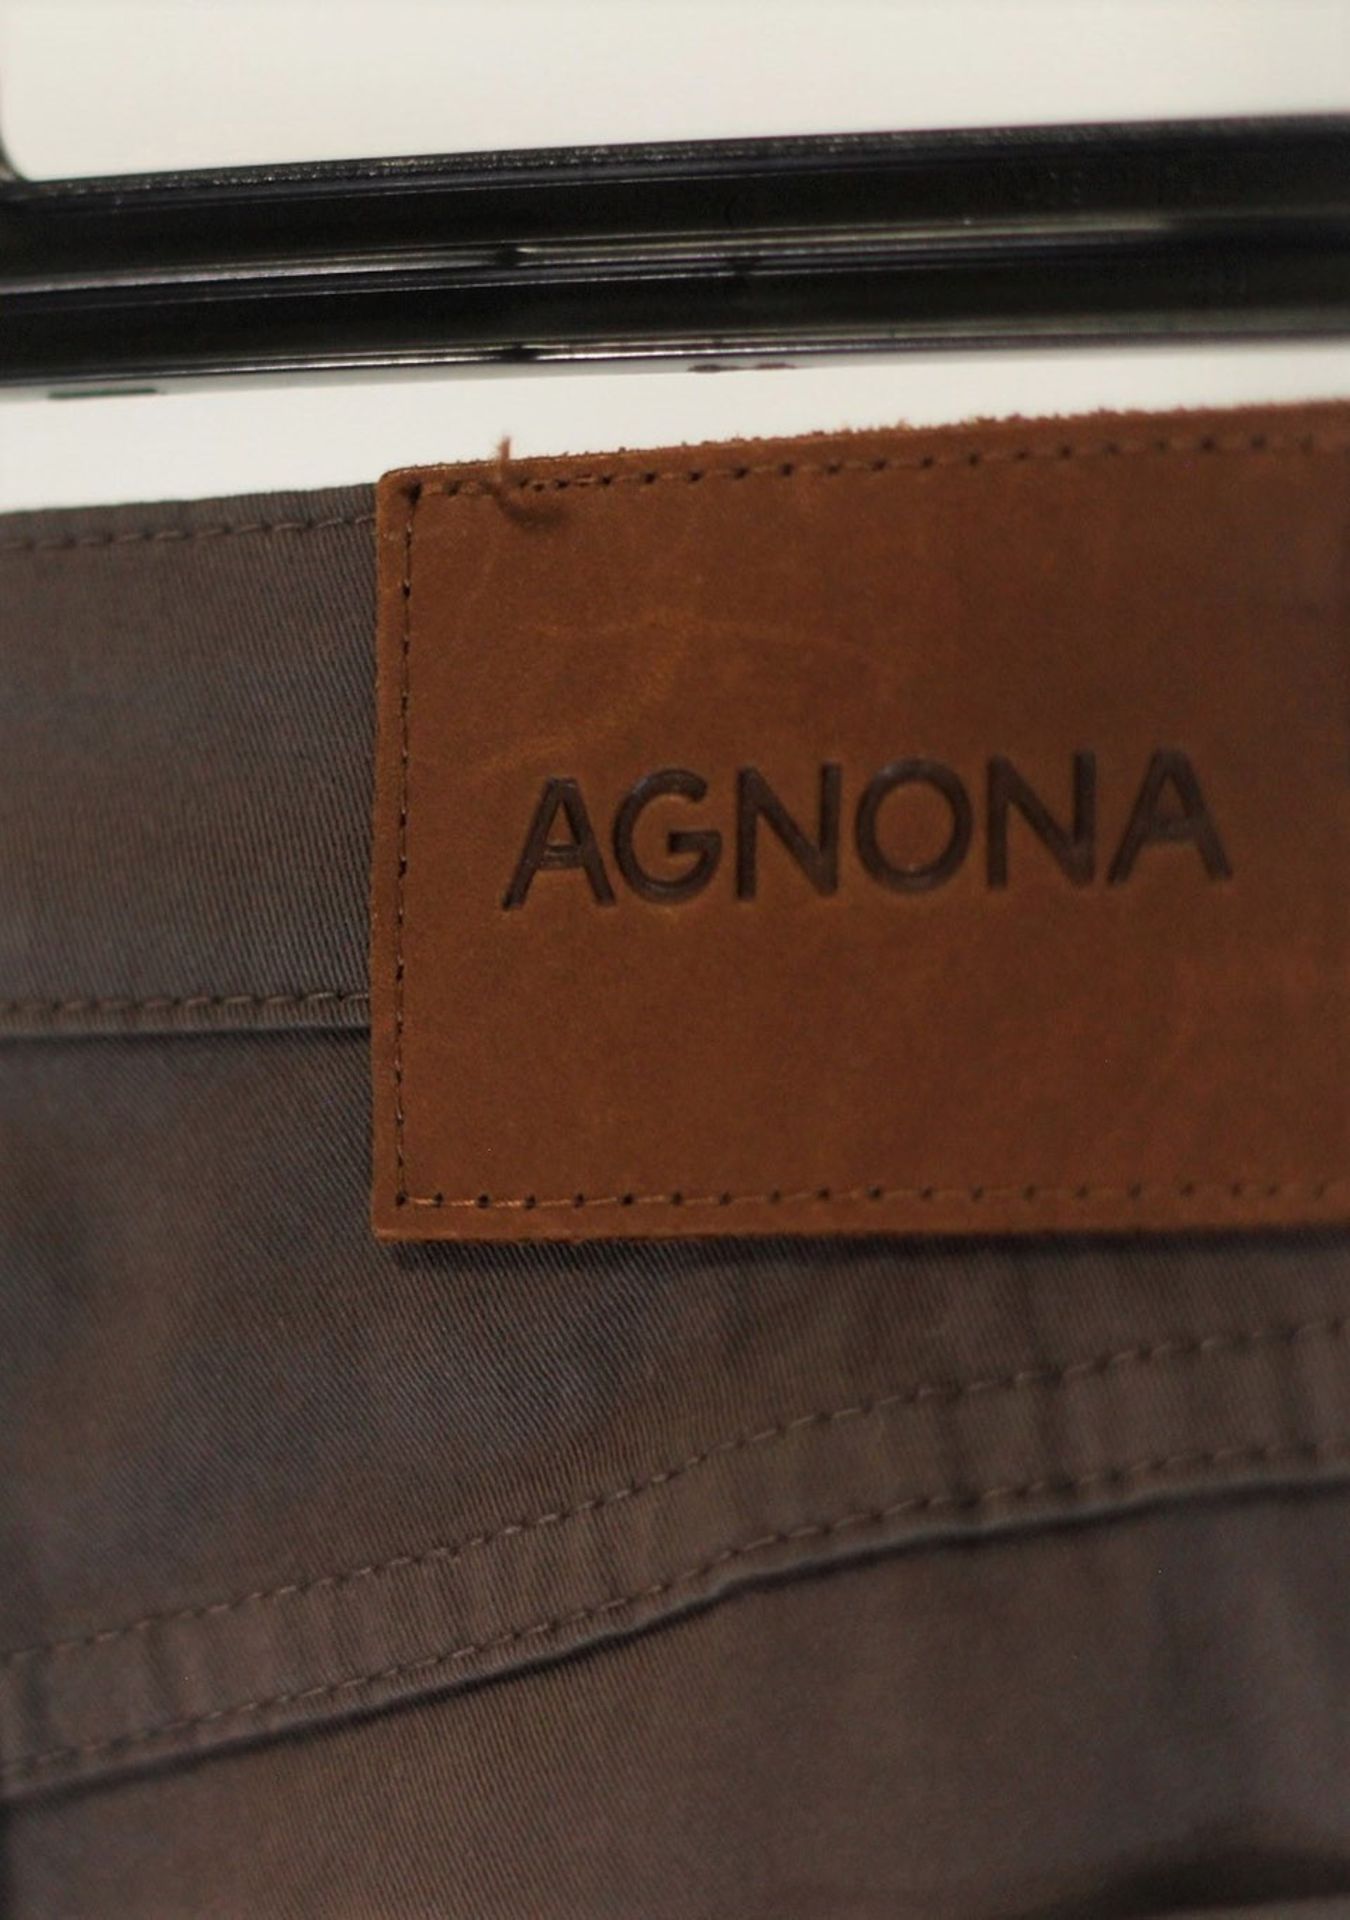 1 x Agnona Brown Jeans - Size: 12 - Material: 98% Cotton, 2% Elastane. Lining 100% Cotton - From a - Image 4 of 6